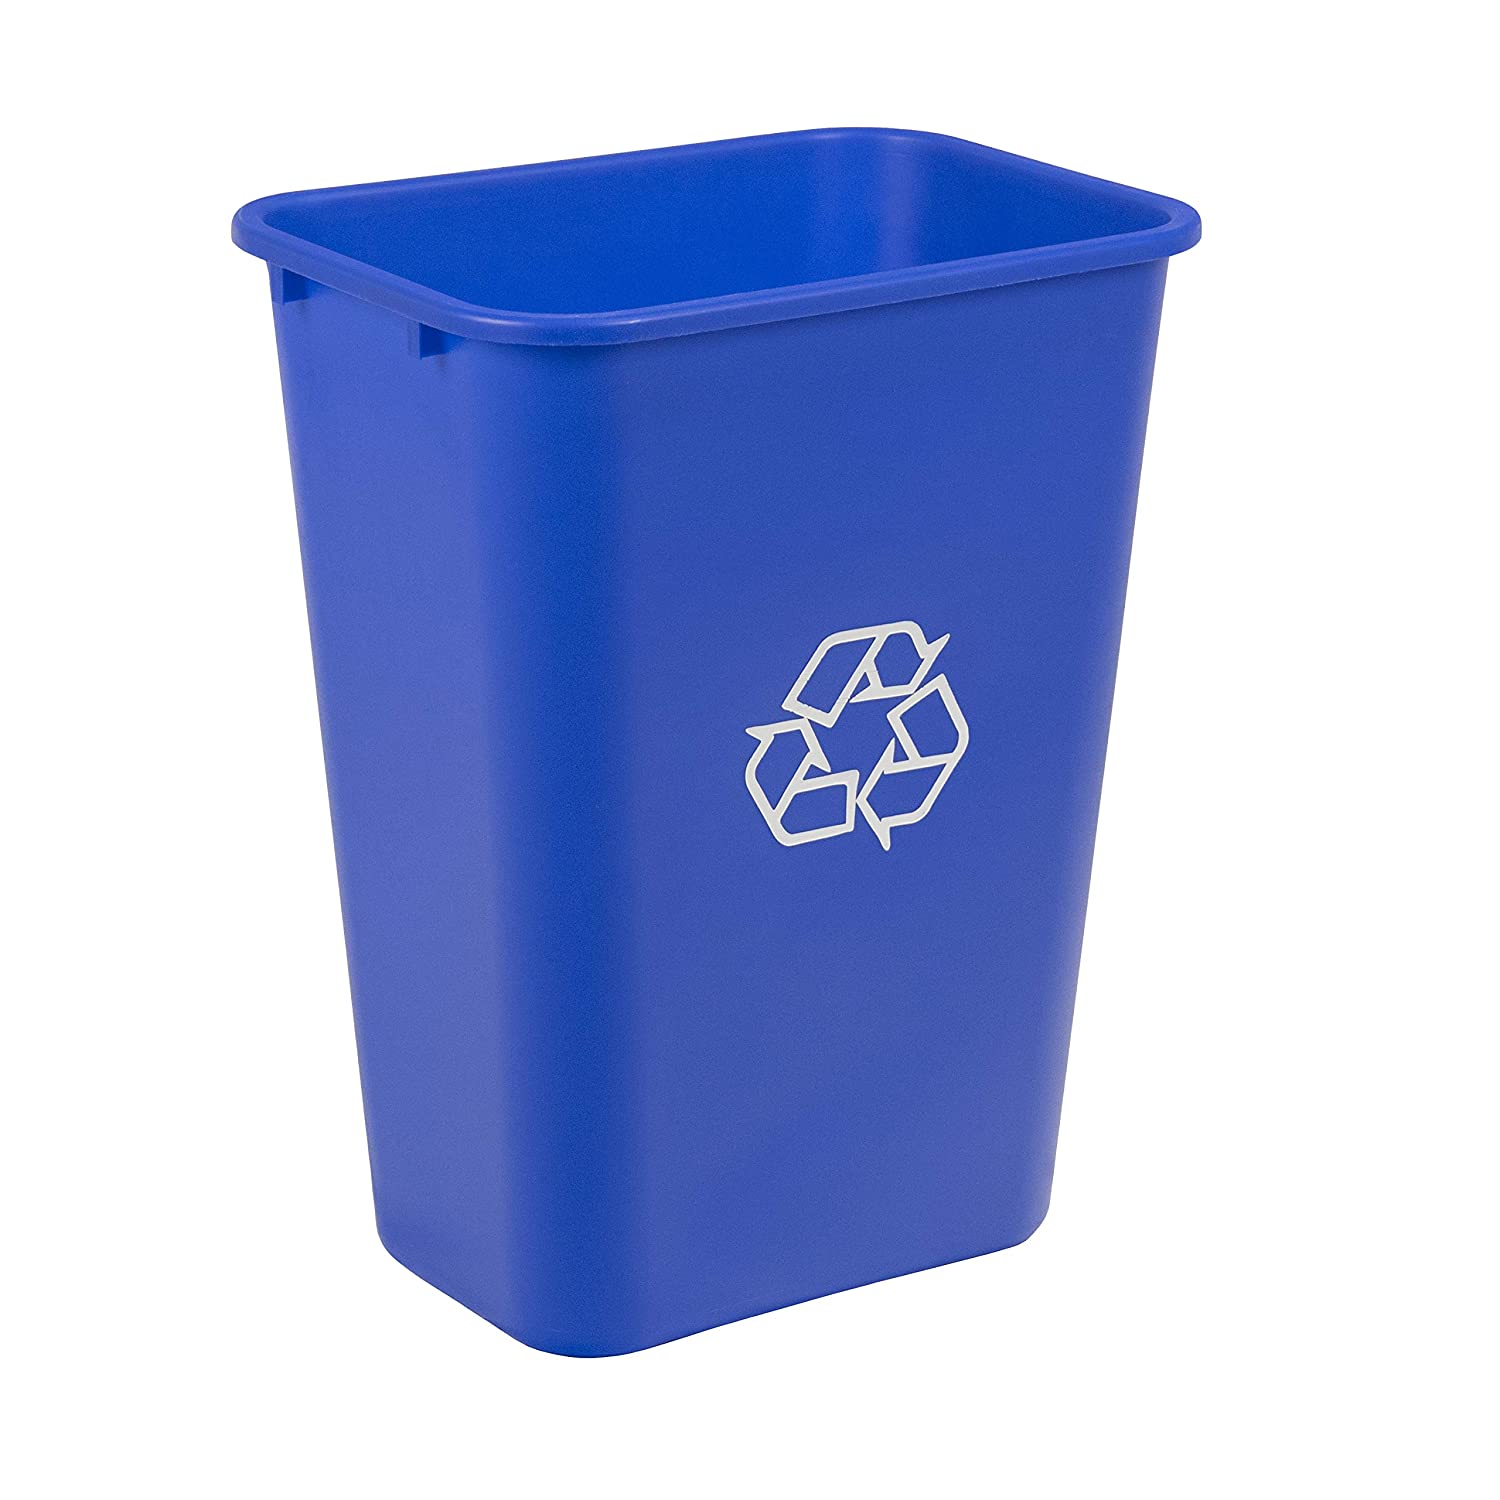 AmazonCommercial Lightweight Recycling Bin, 10-Gallon